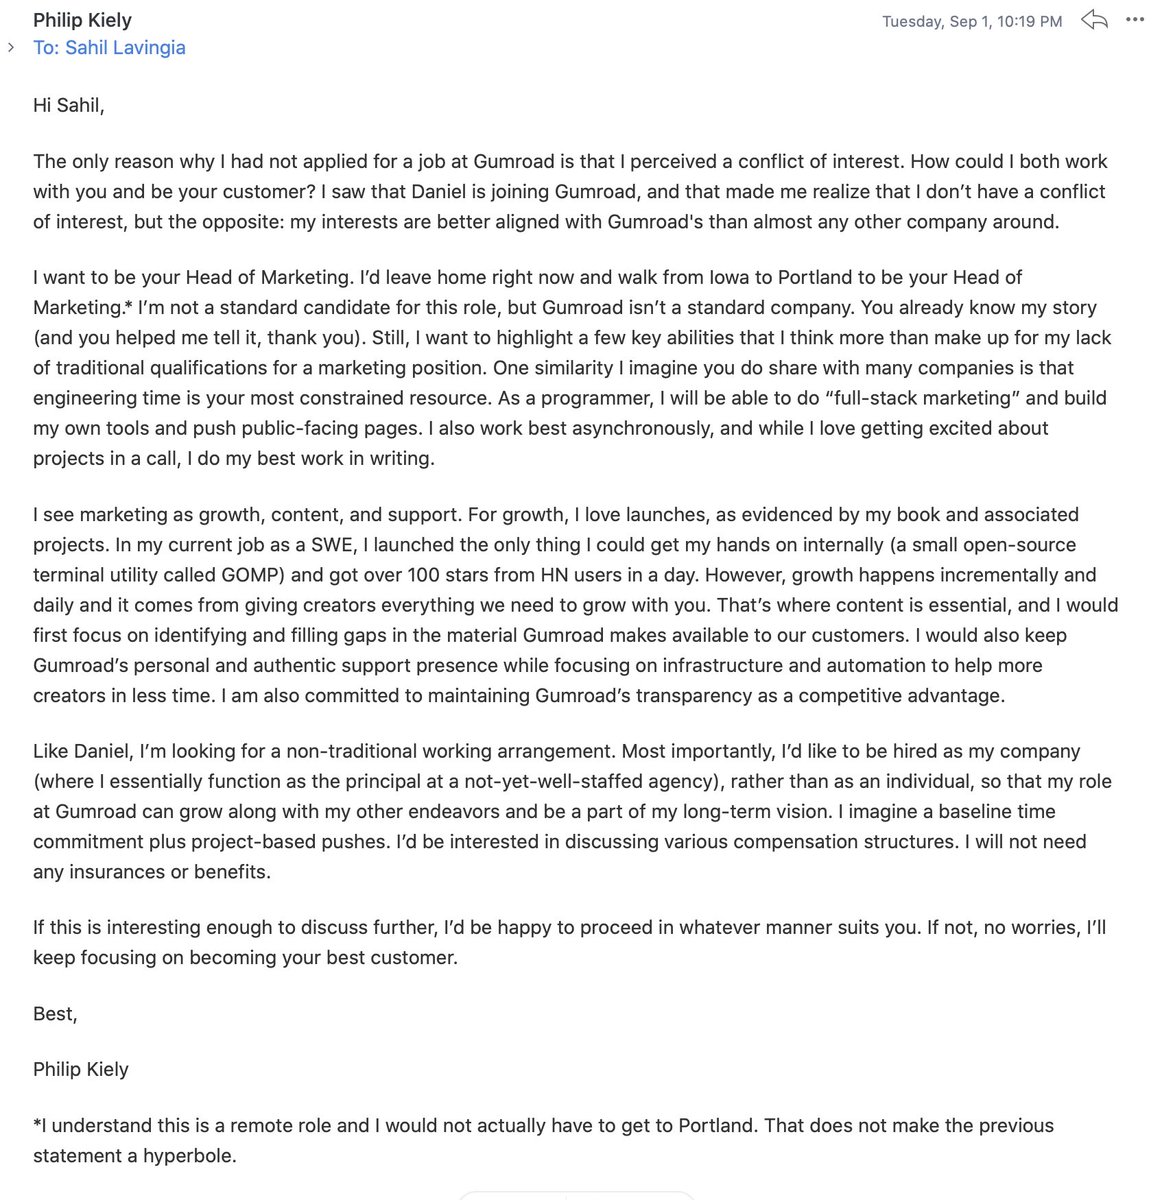 2/Inspired by Daniel's cold email,  @philip_kiely cold emailed  @shl that helped him bag the Head of Marketing role proving yet again that opportunities open when you write compelling cold emails